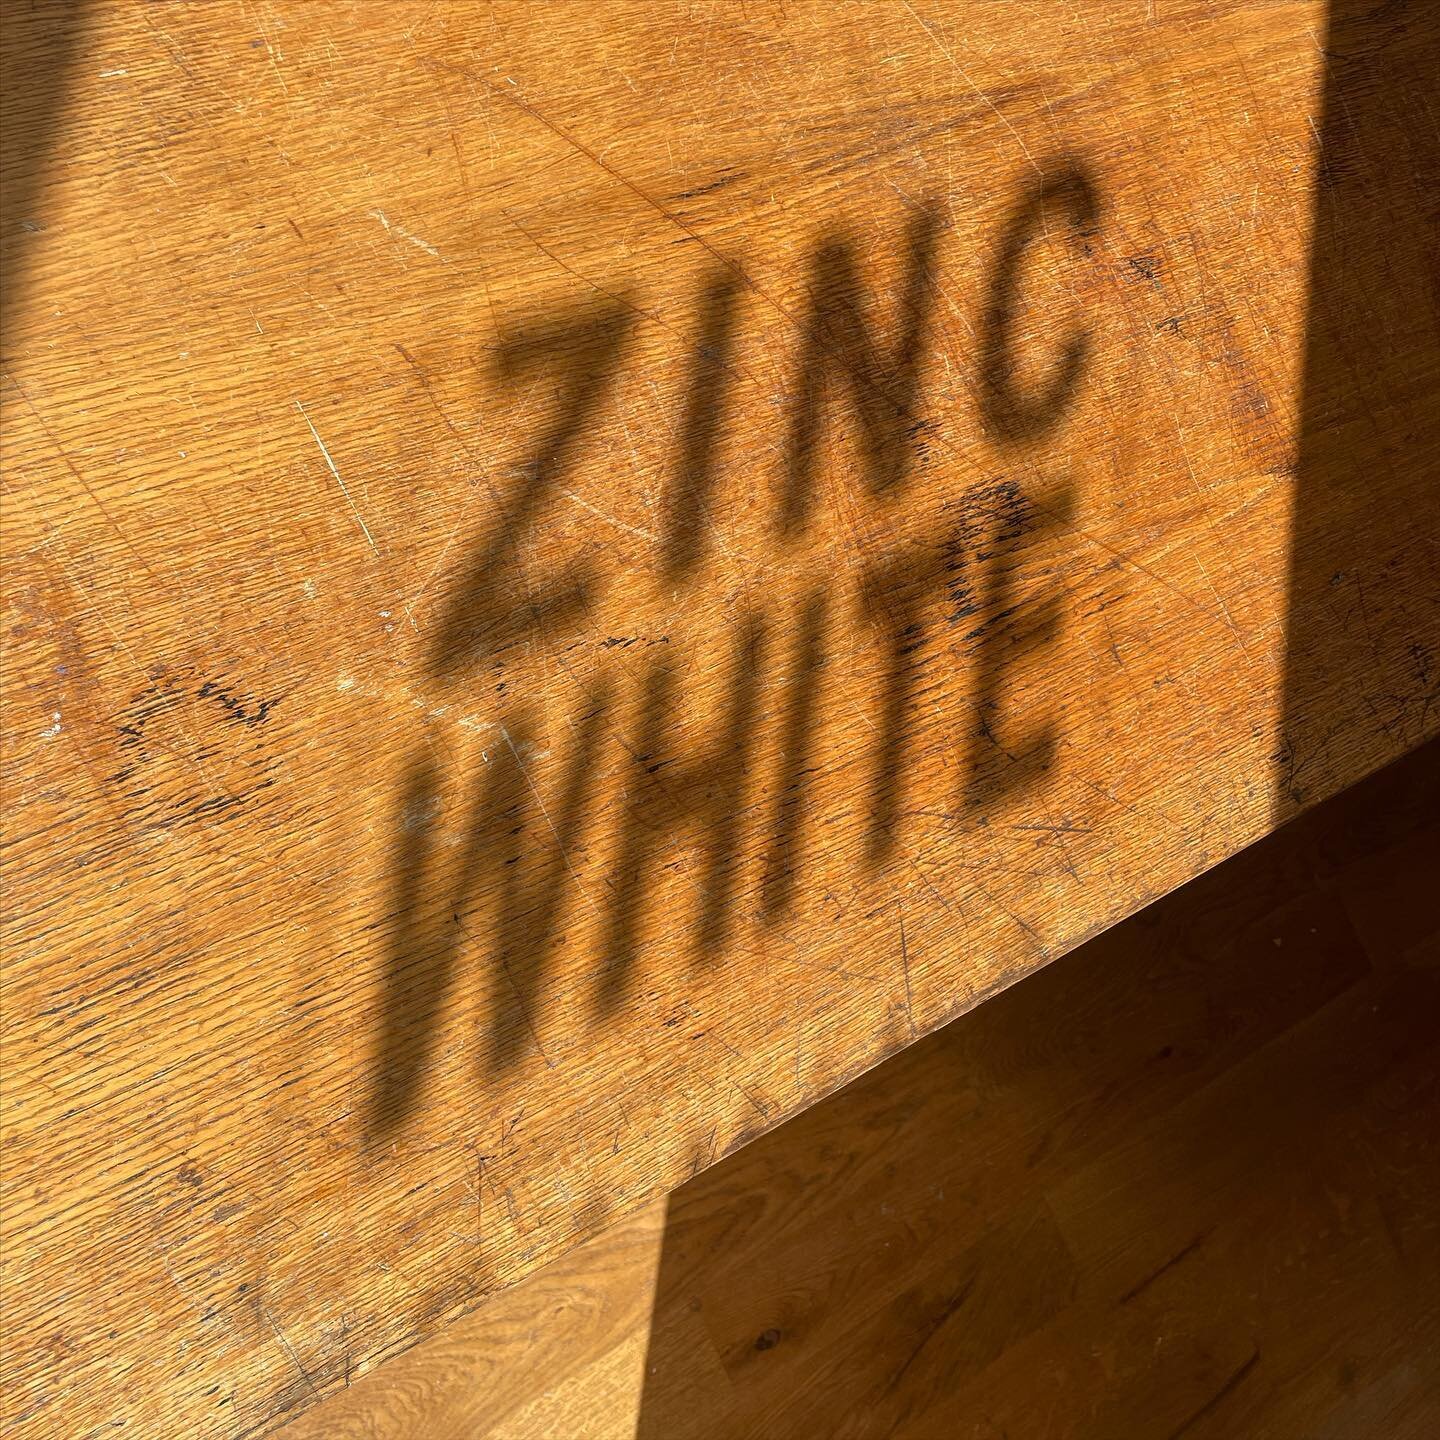 We are hiring! 

Zinc White Framing has an opportunity to join our team as an Intermediate/Experienced Picture Framing Technician. This is a full time position and relevant experience is required.

To apply, please send an email addressed to Elliott 